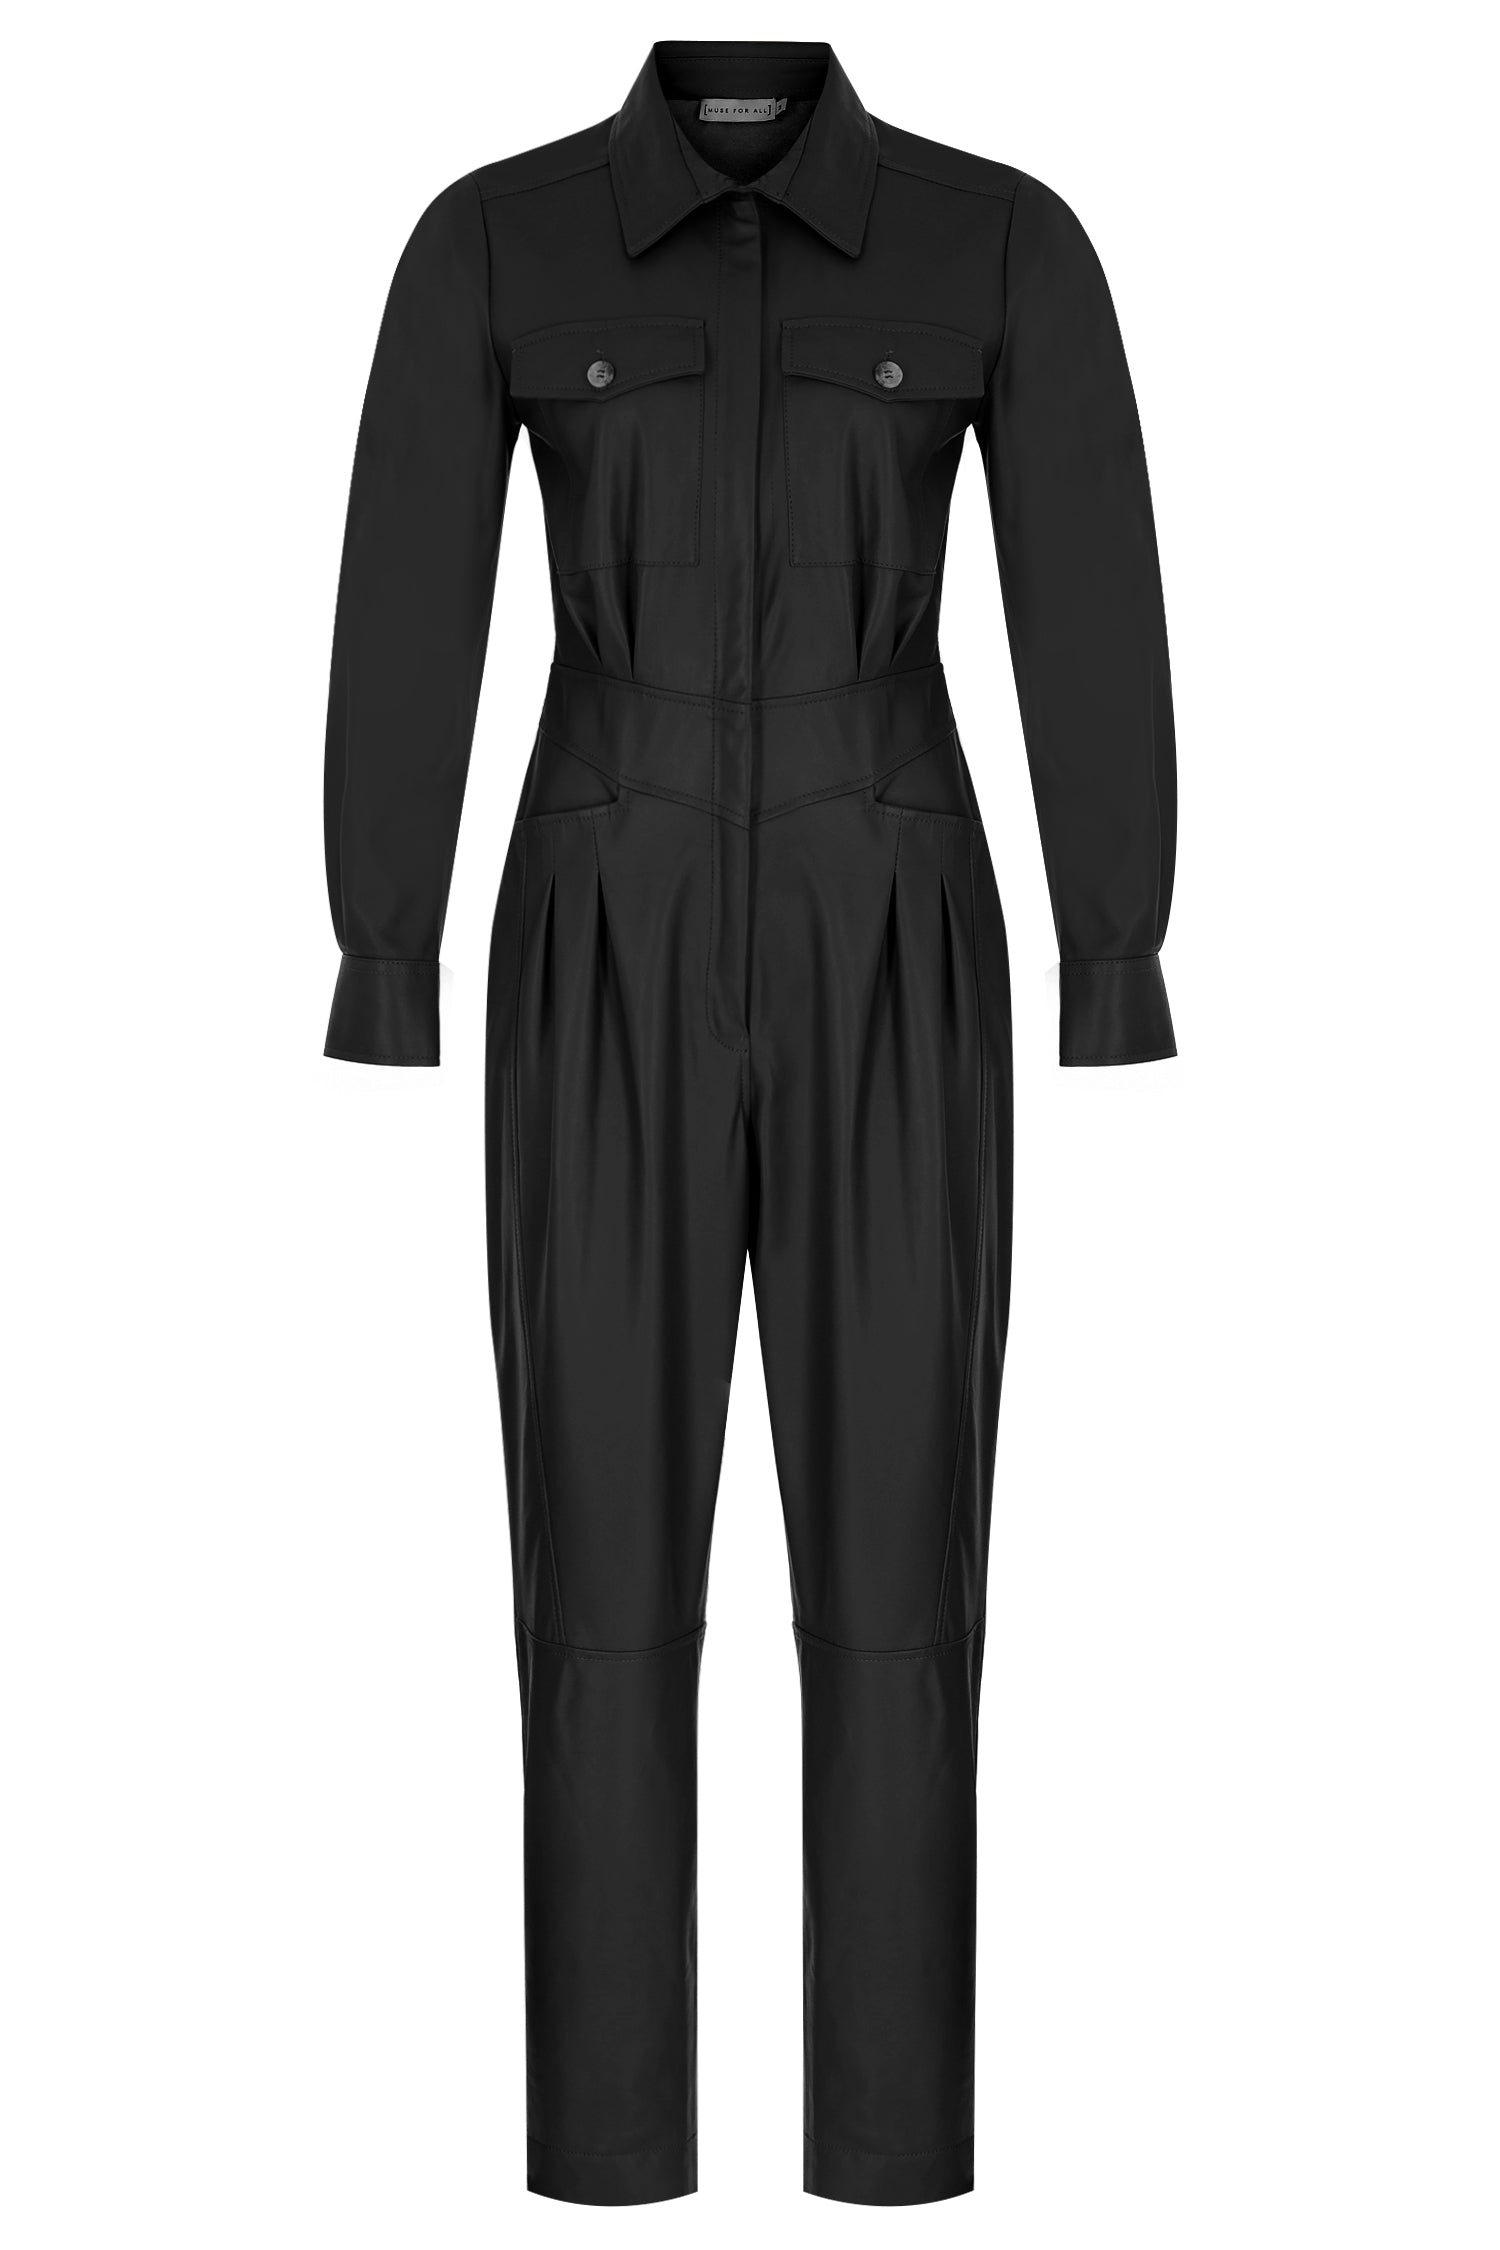 Buy Black Leather Jumpsuit Online at Leatherright